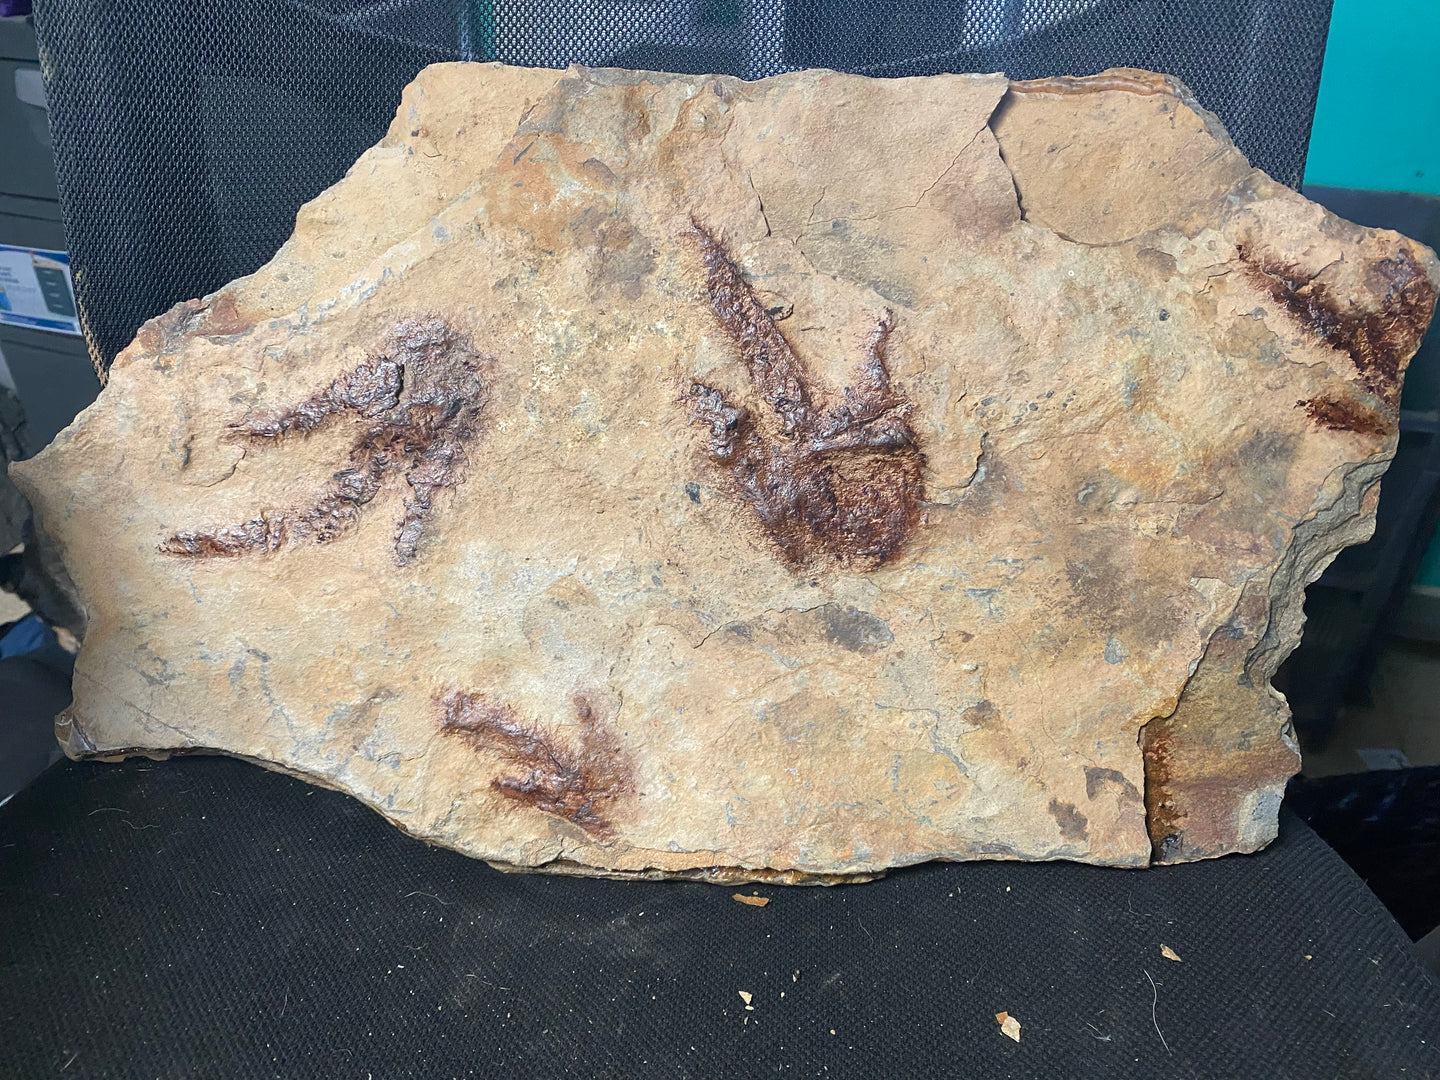 Awesome Raised Fossil Dinosaur Trackway for Sale - Fossil Daddy